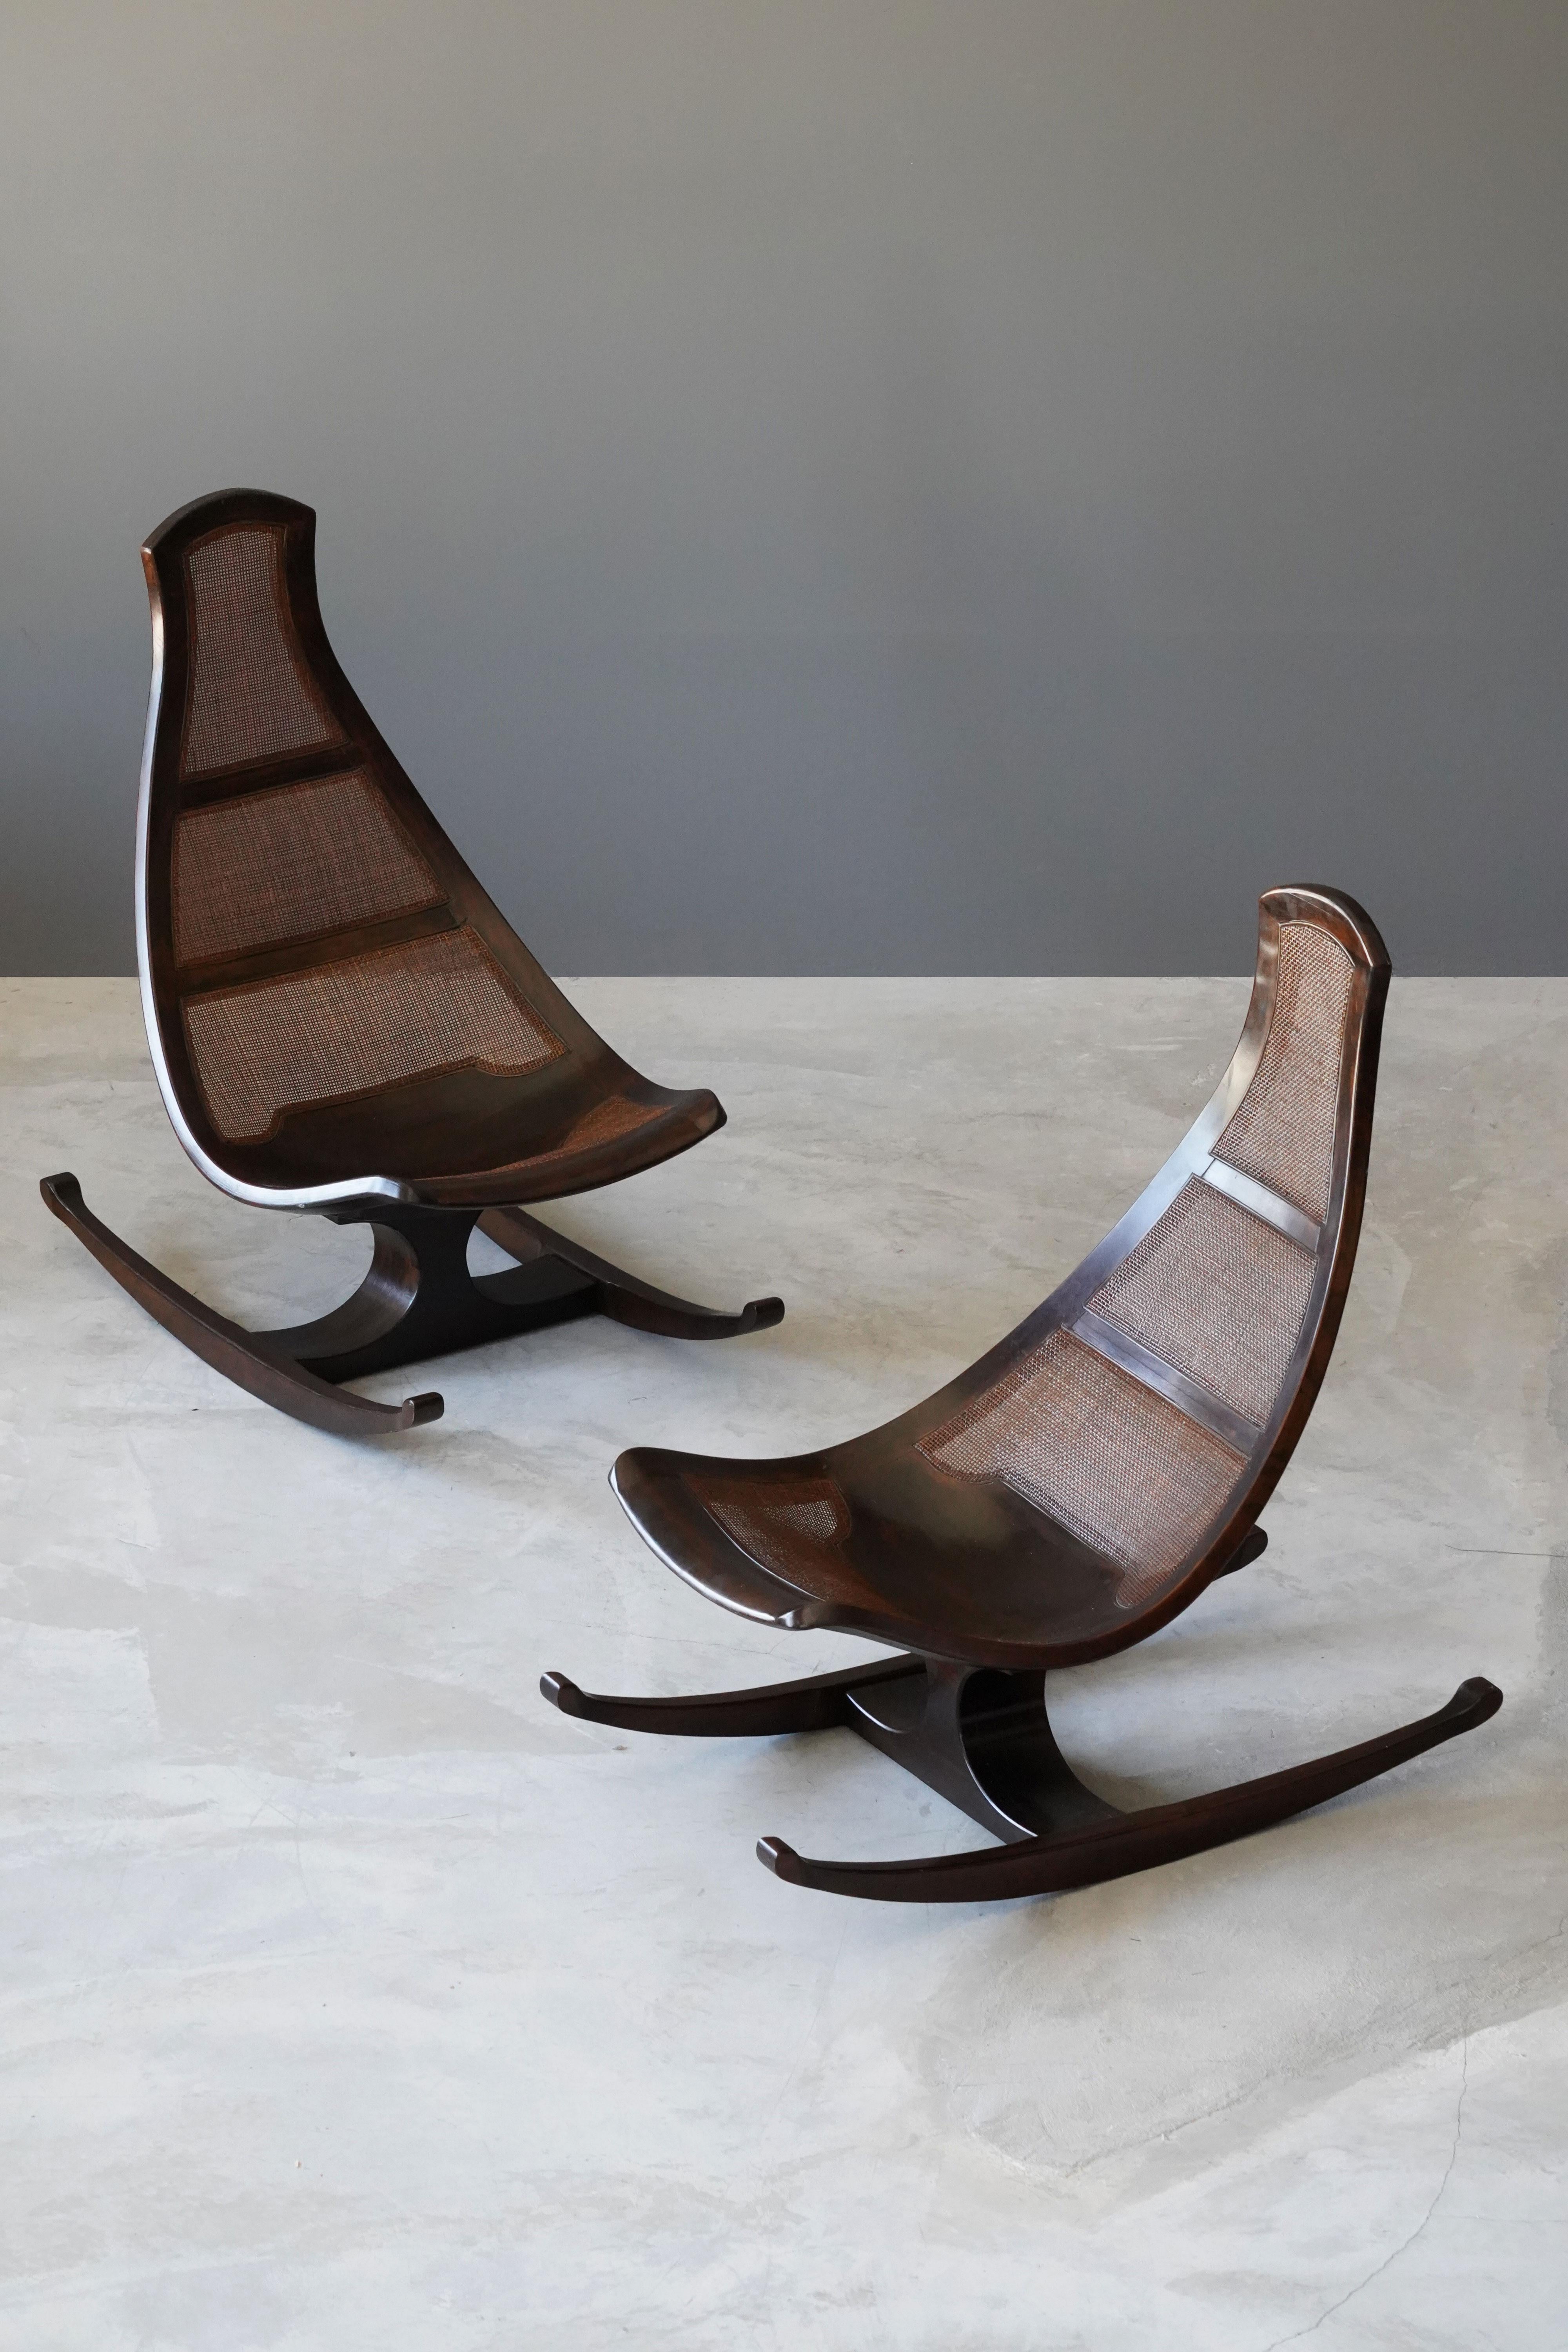 A highly modern and organic rocking lounge chair by an unknown modernist designer. Finely carved mahogany is paired with cane panels. Produced circa 1970s.

Stems from a private collection in Chicago, originally acquired at Marshall Fields,